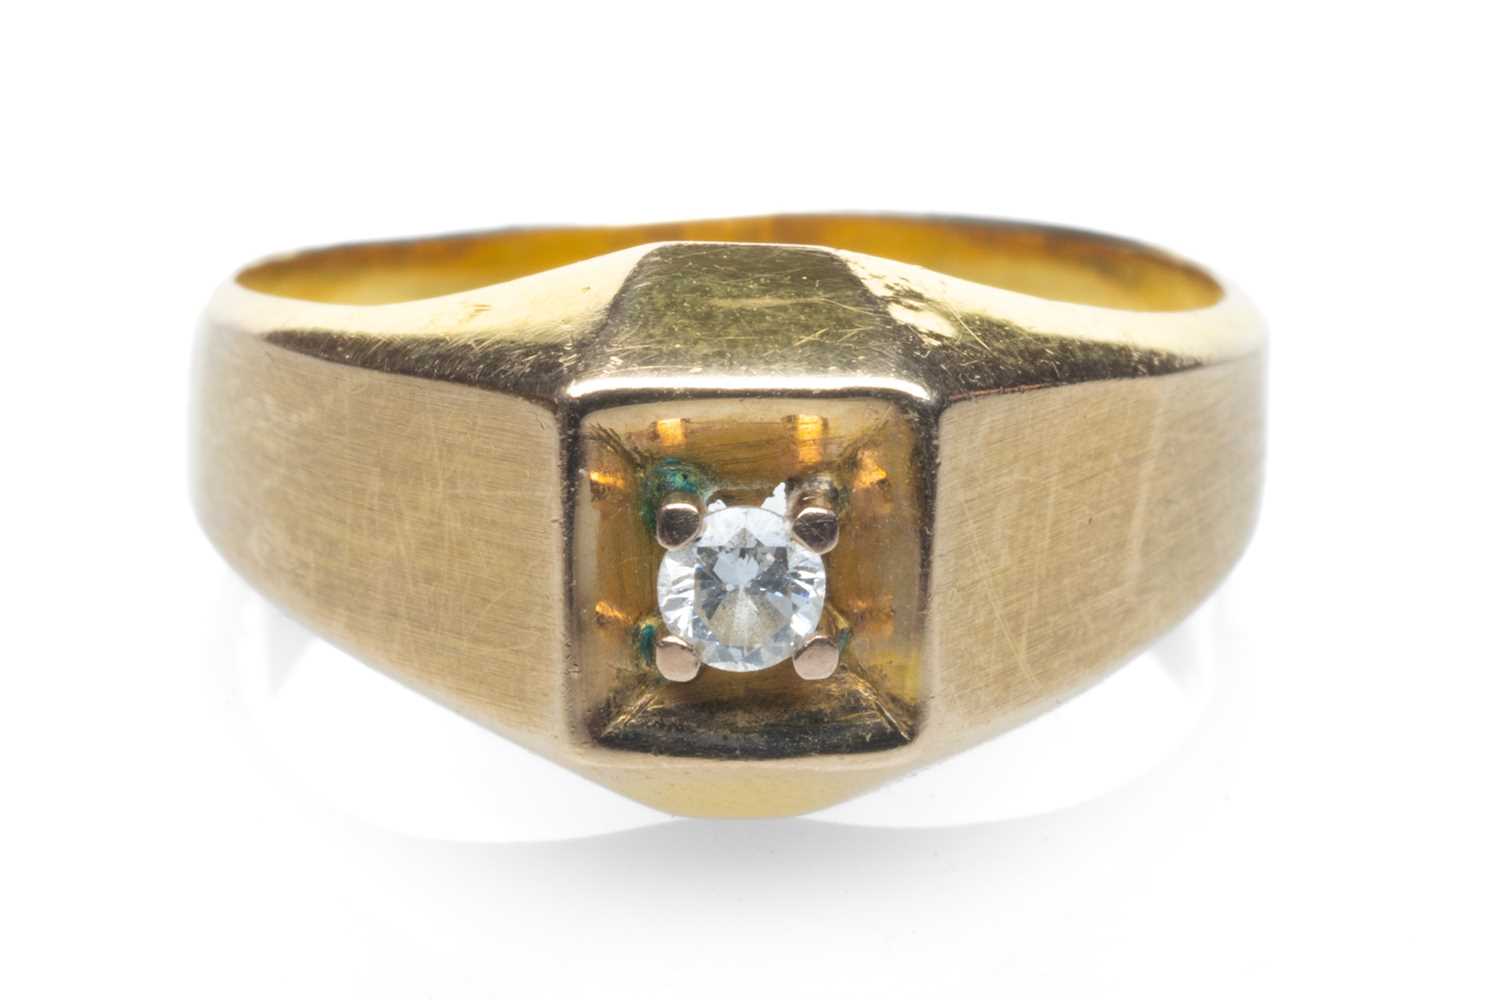 14K GOLD DIAMOND RING, ring size O, 3.9gms Provenance: private collection Cardiff Comments: wear